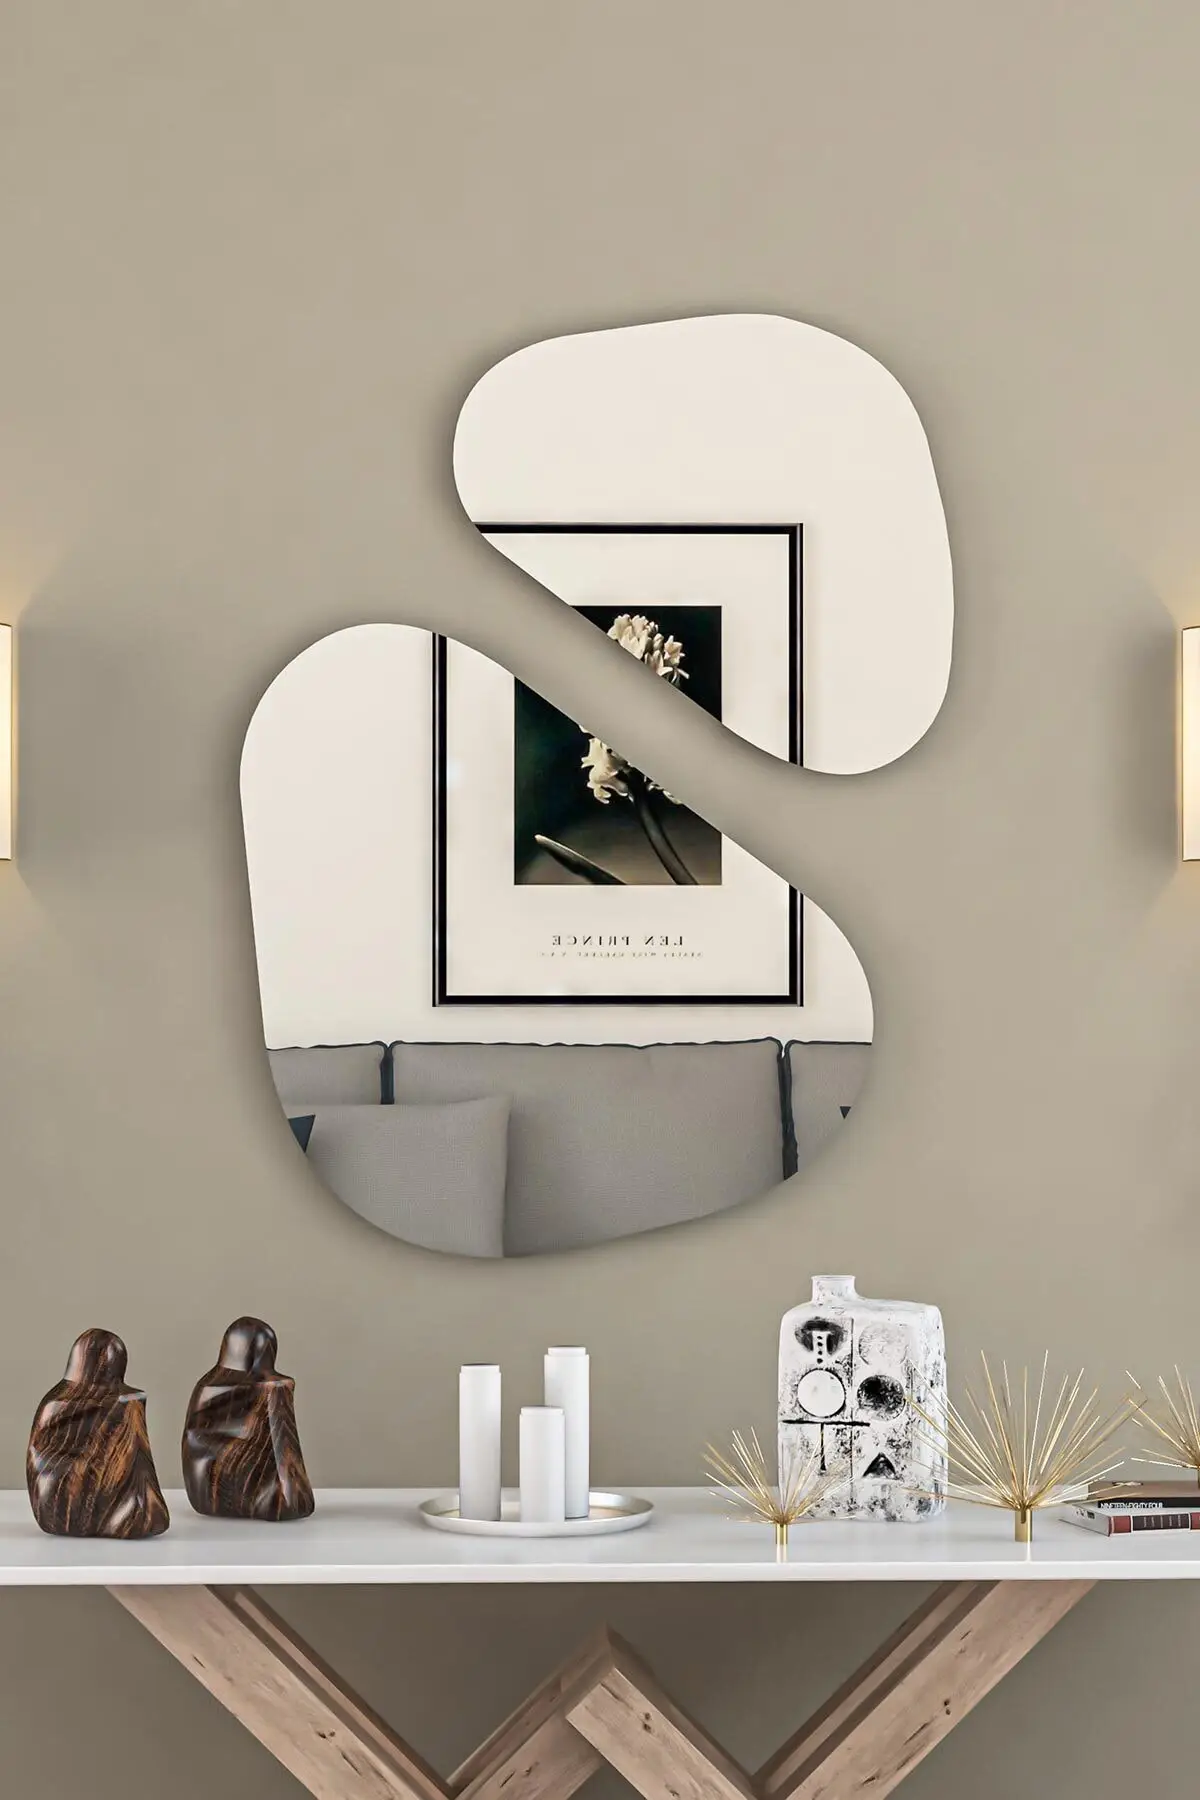 Decorative Wall Mirrors Console White Round Oval Furniture Full Body Mirror Length Decor Bathroom Made In From Turkey